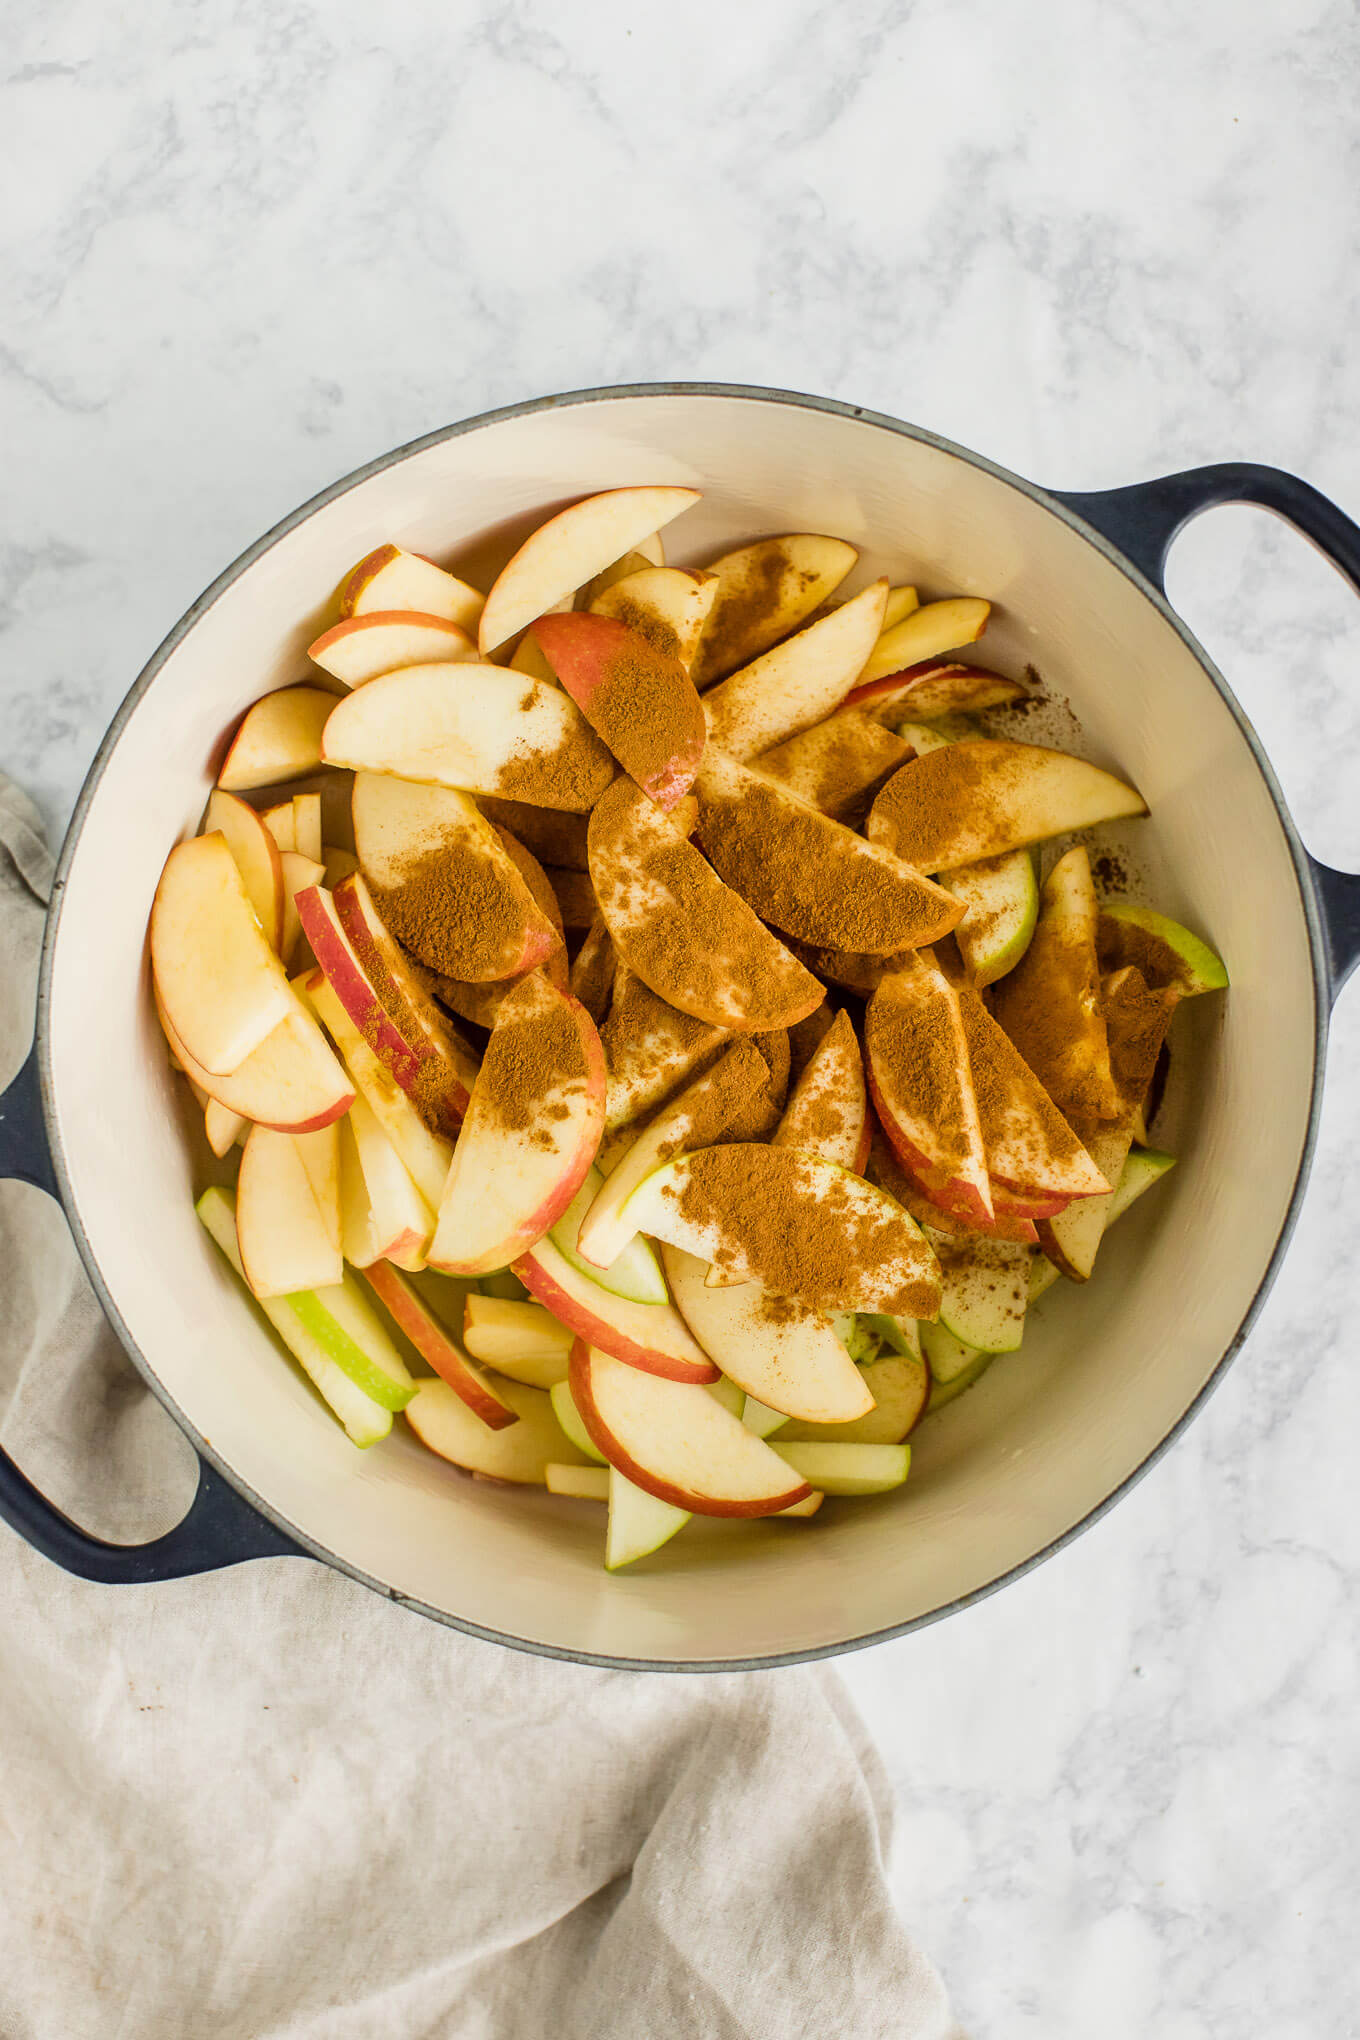 Apple Slices with cinnamon Cinnamon for Baked Apple Slices